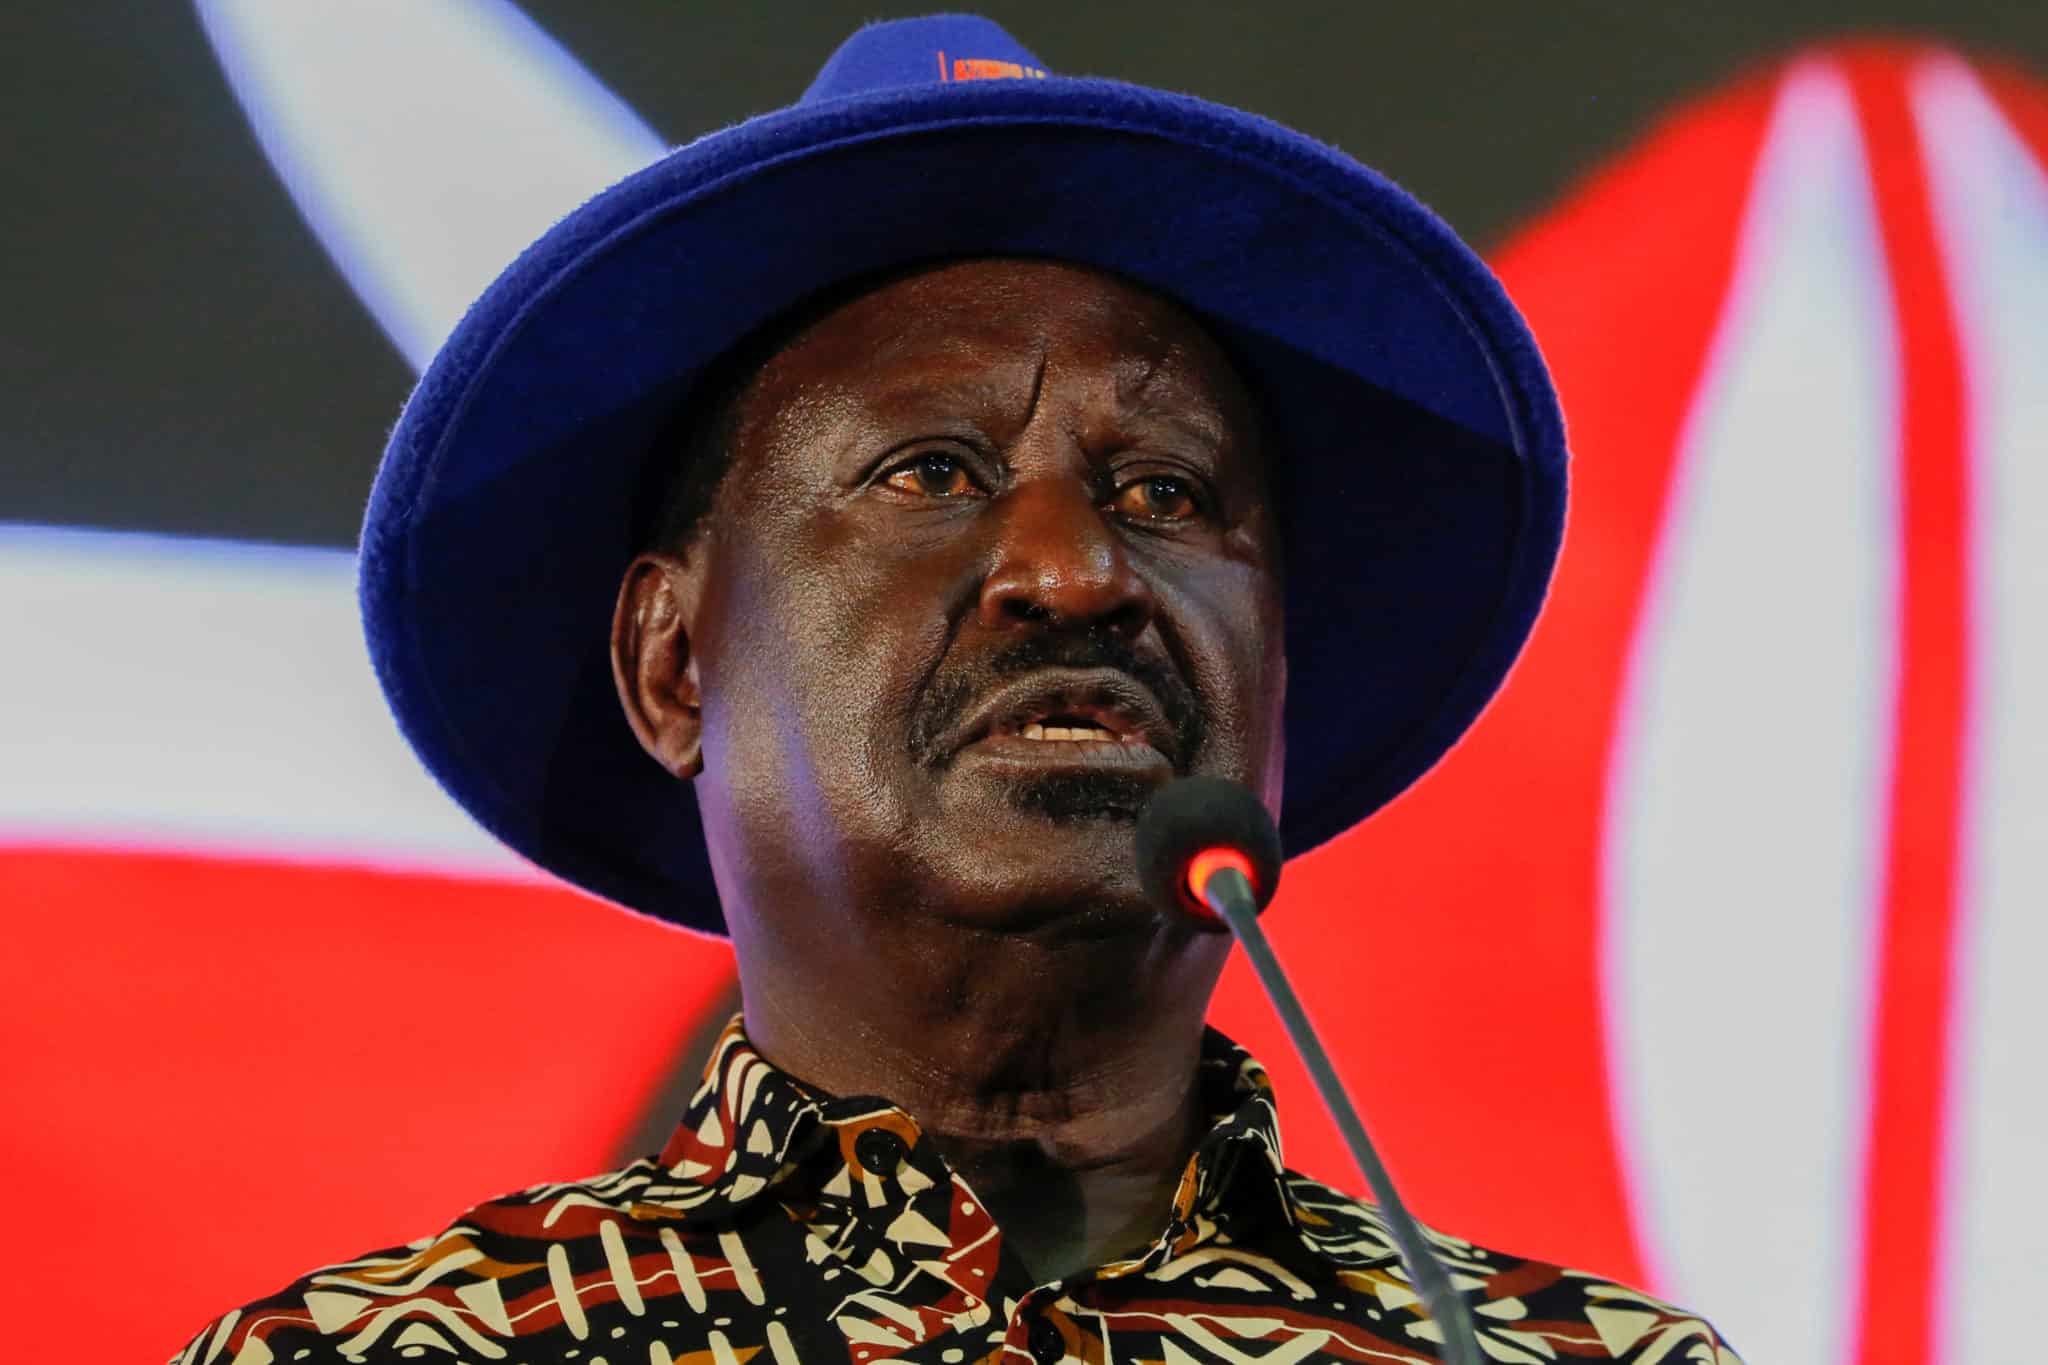 Odinga rejects Kenyan presidential election results, calls for calm